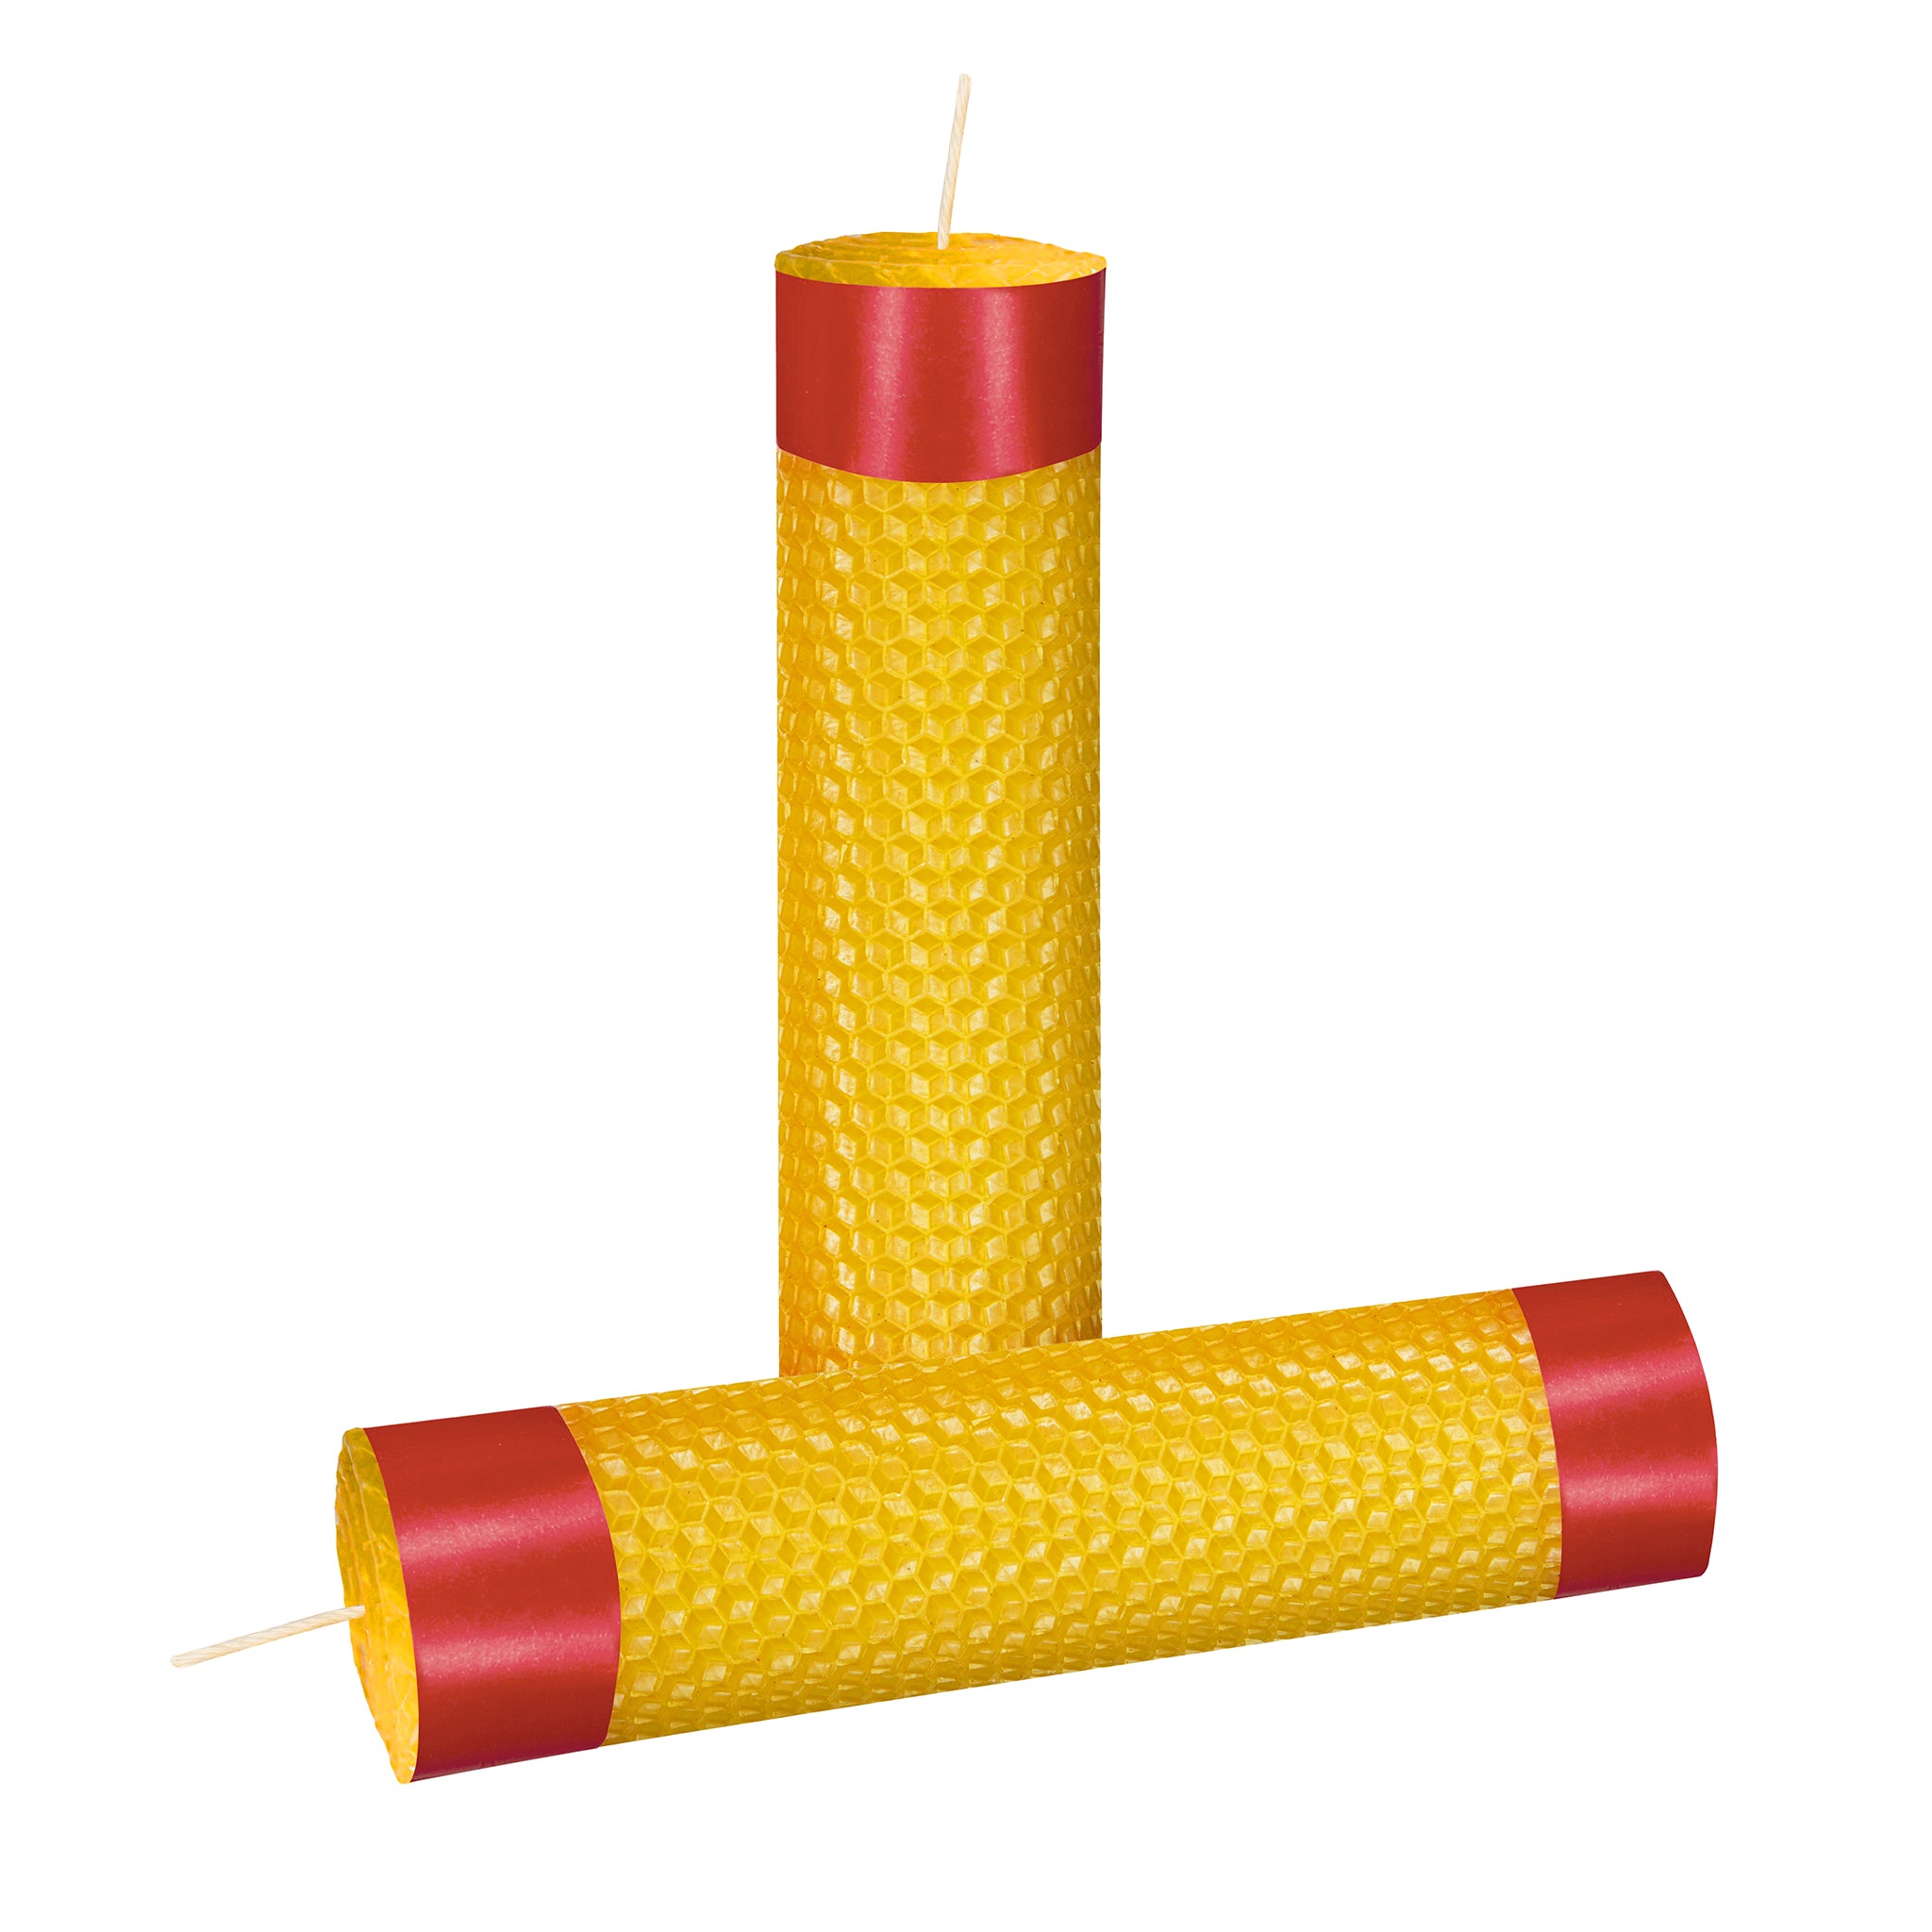 Unscented beeswax candle